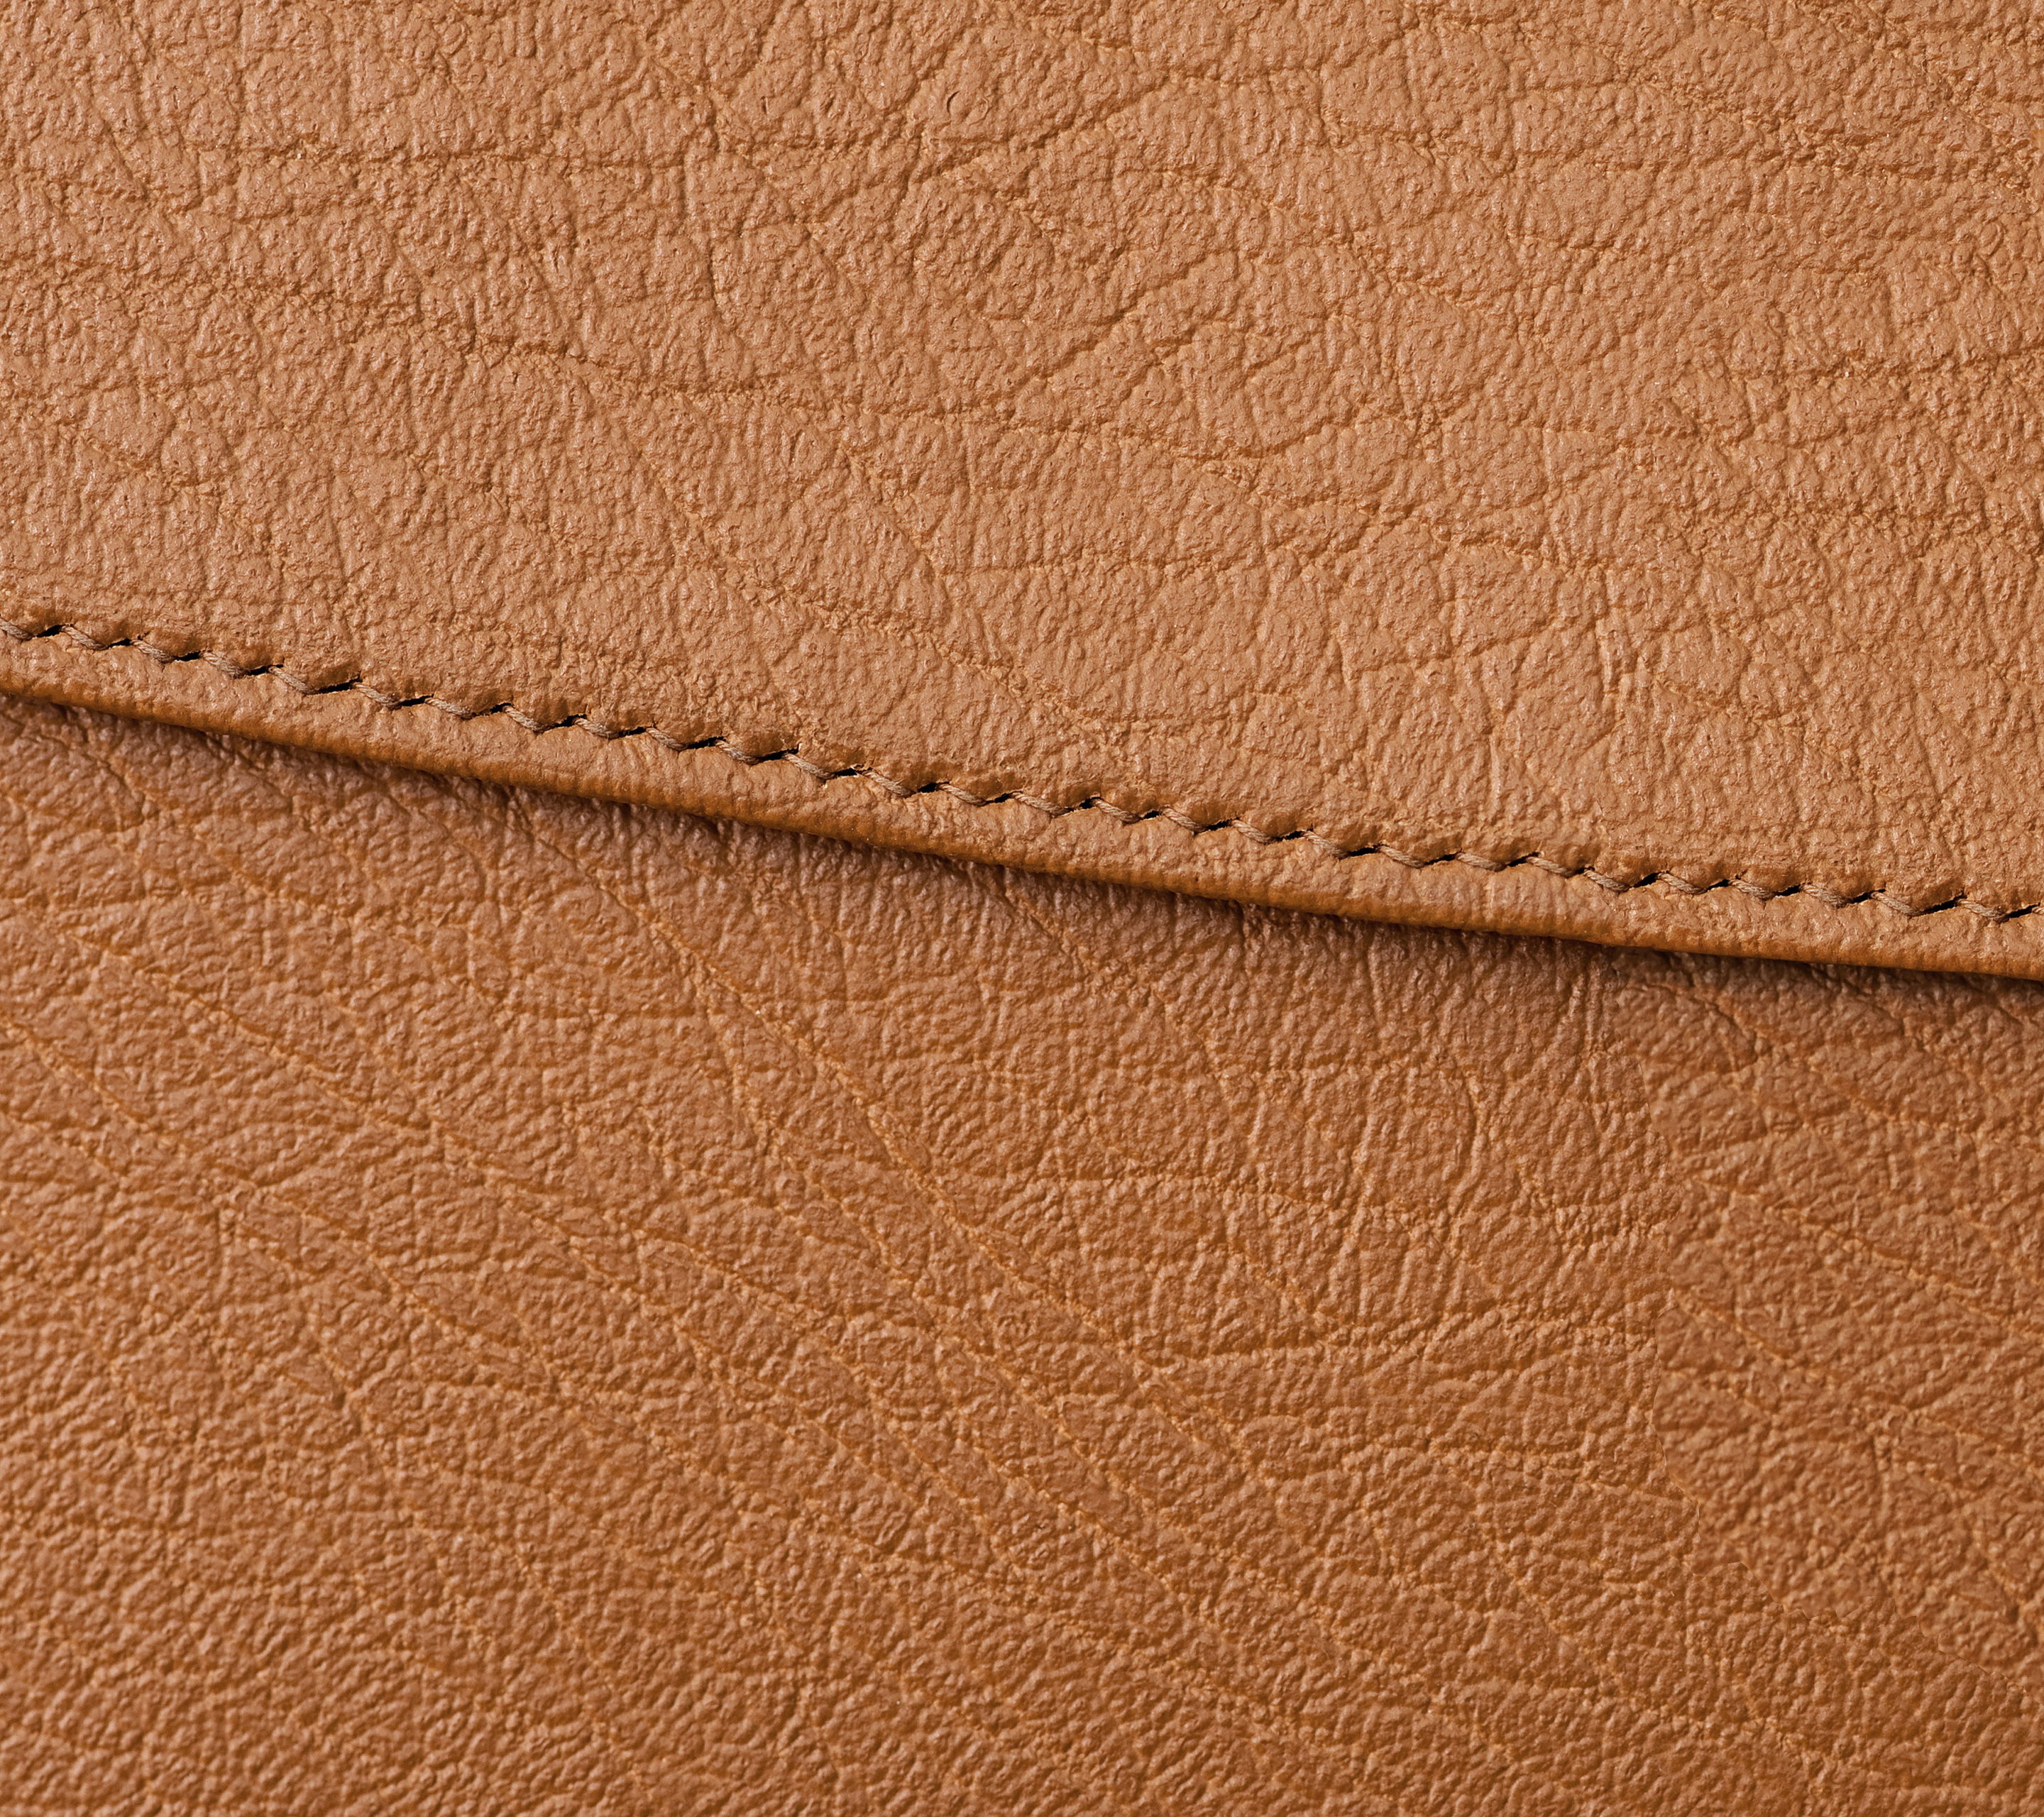 The Official Lg G4 Wallpaper Here Leather Background